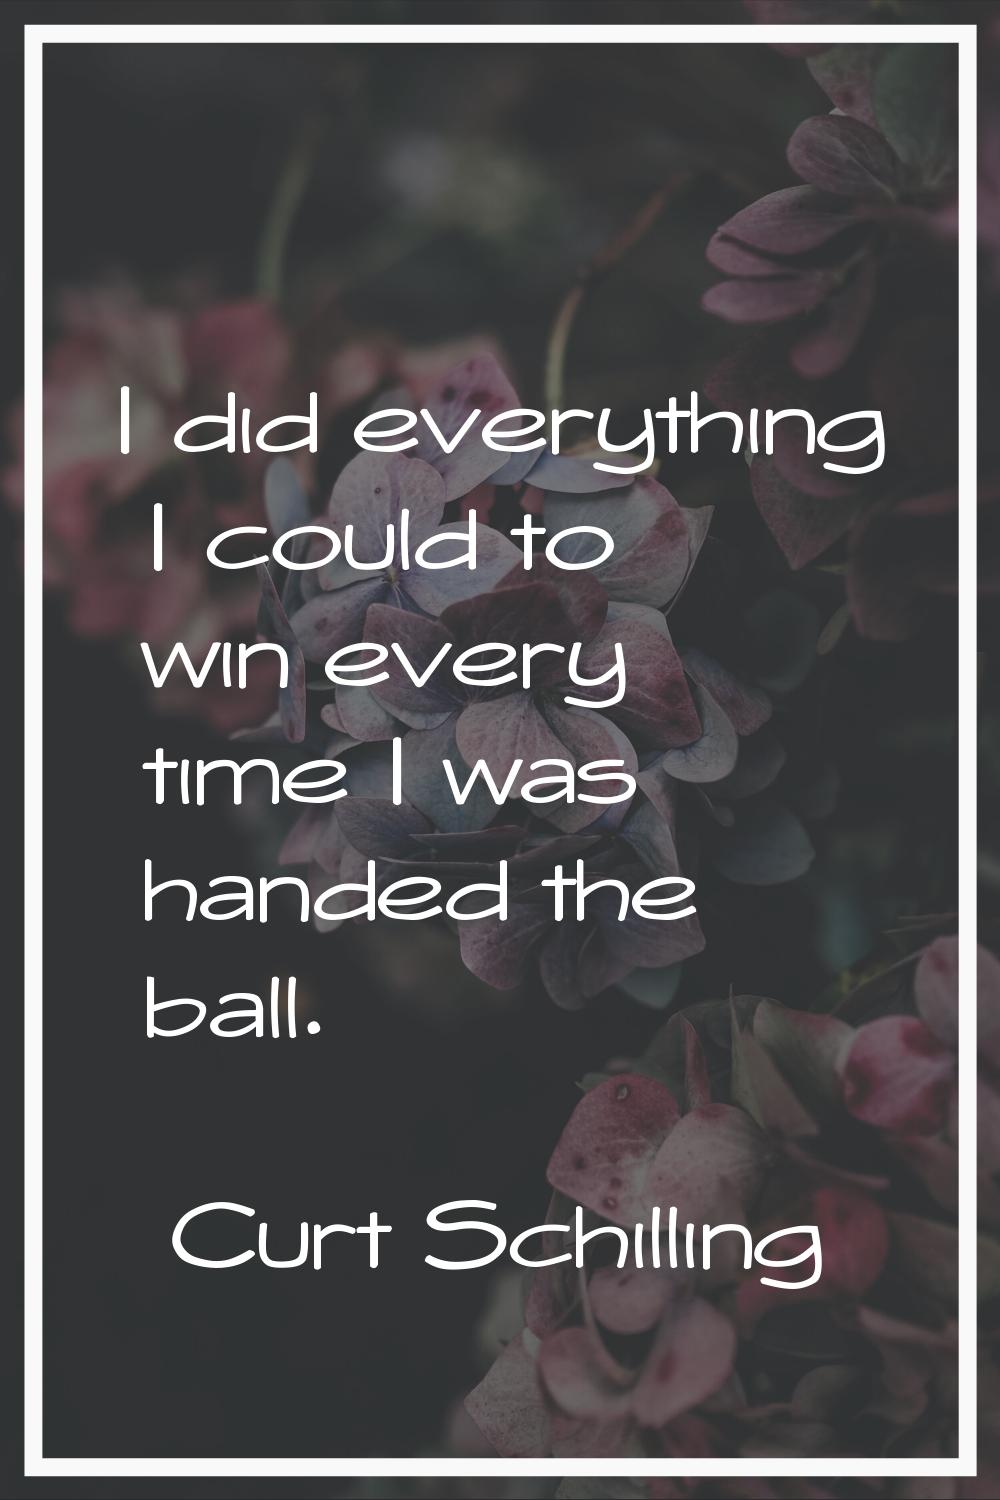 I did everything I could to win every time I was handed the ball.